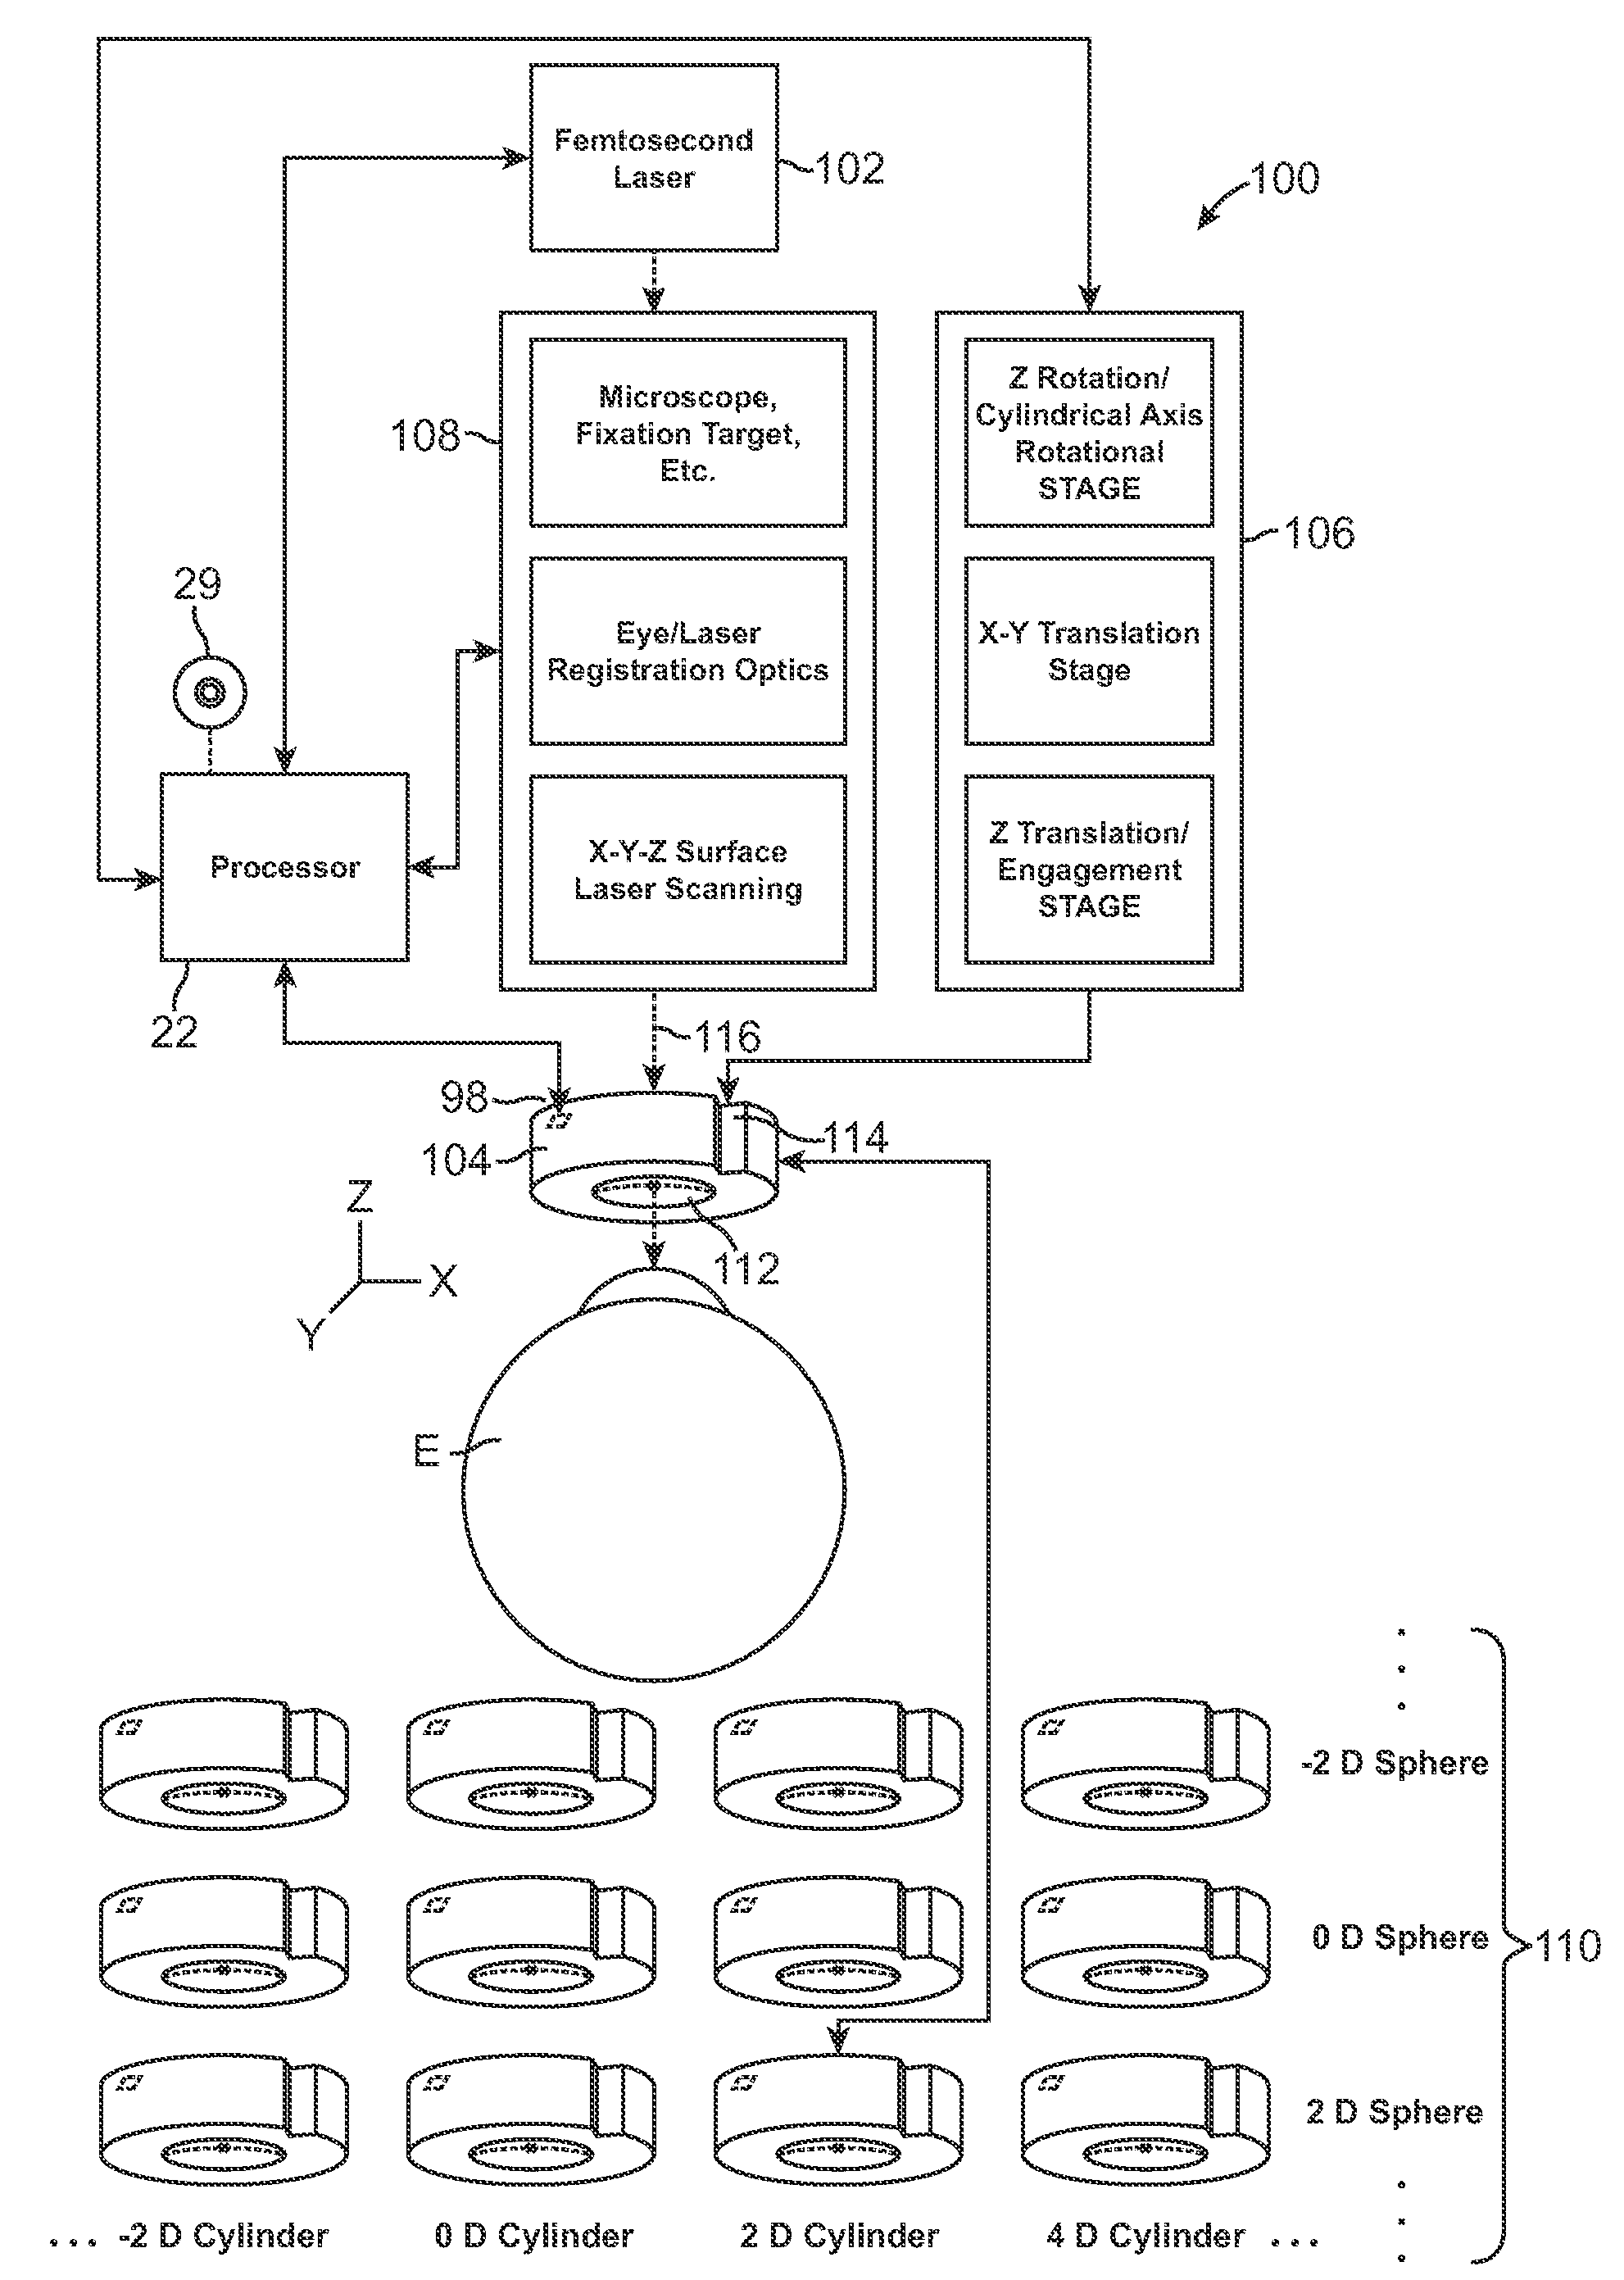 Intrastromal Refractive Correction Systems and Methods